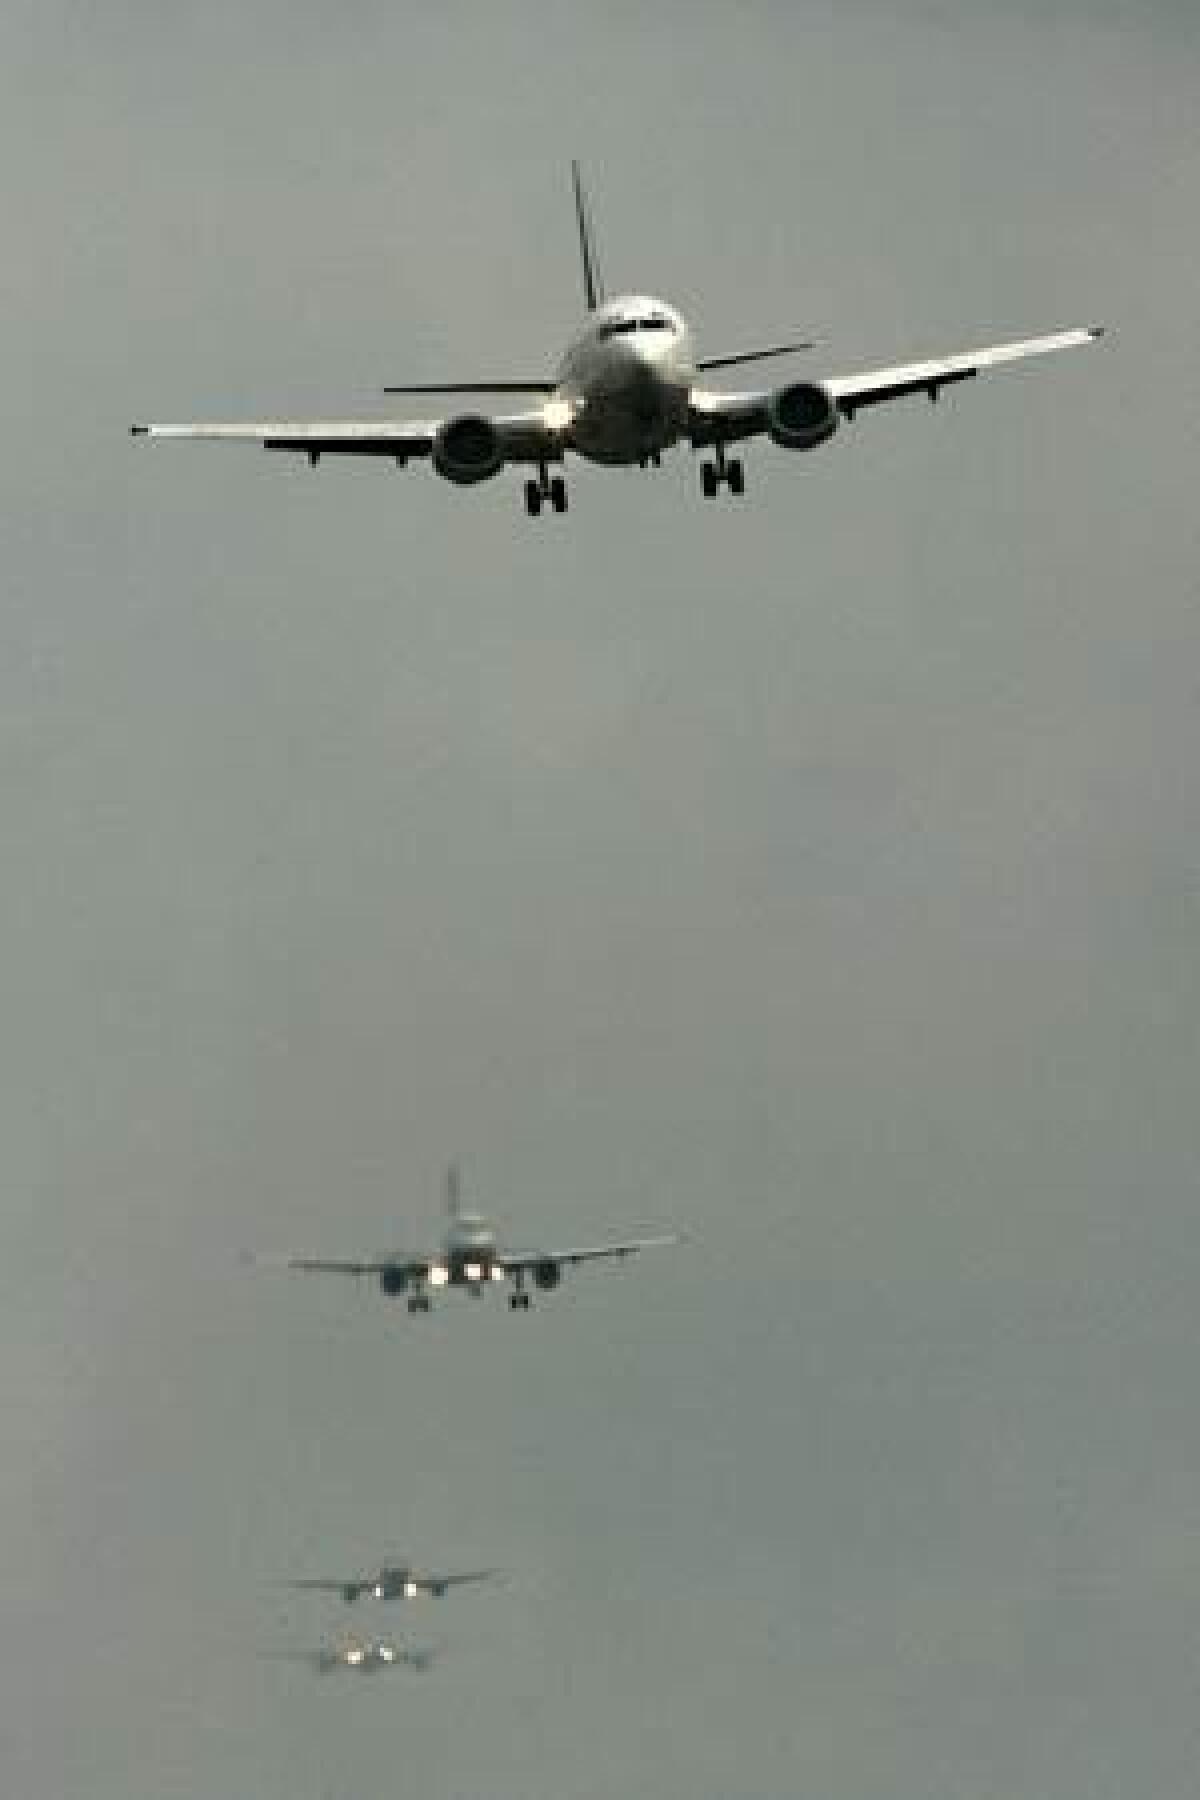 Airplanes line up to land at Heathrow airport.